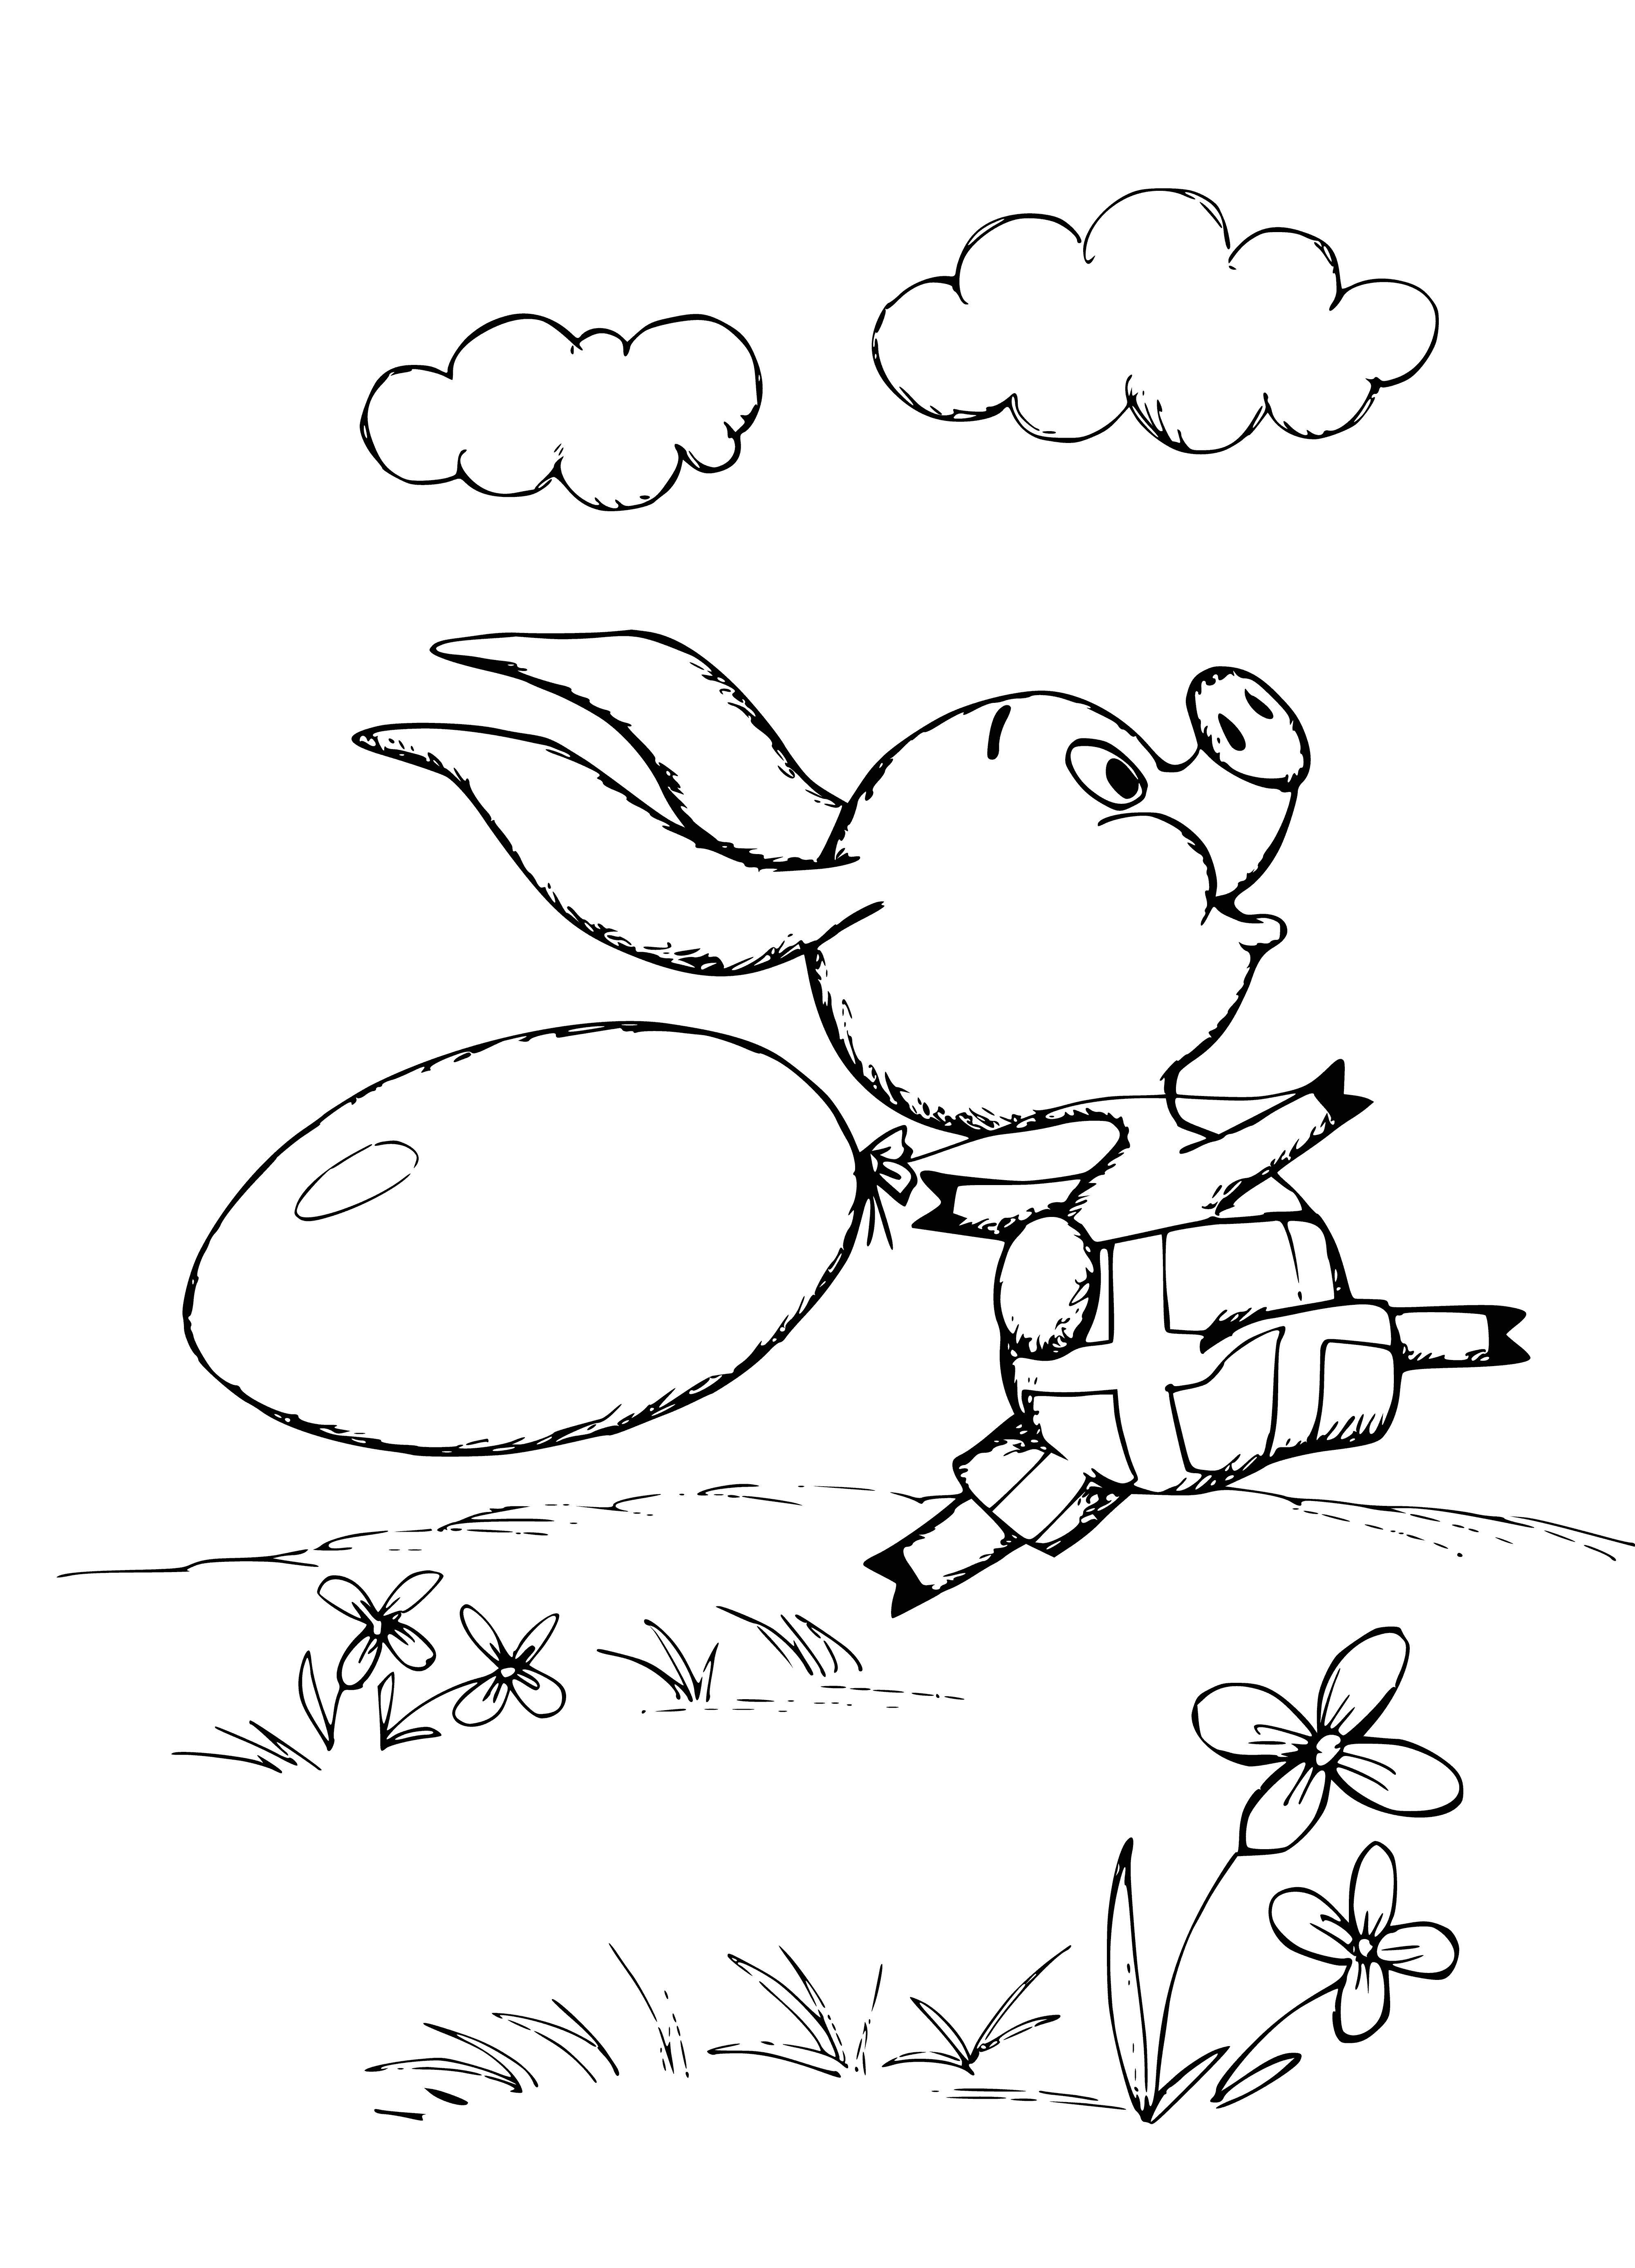 coloring page: Cartoon piglet from Winnie the Pooh sitting in a large, colorful pig-shaped balloon floating in the sky, holding onto a string.